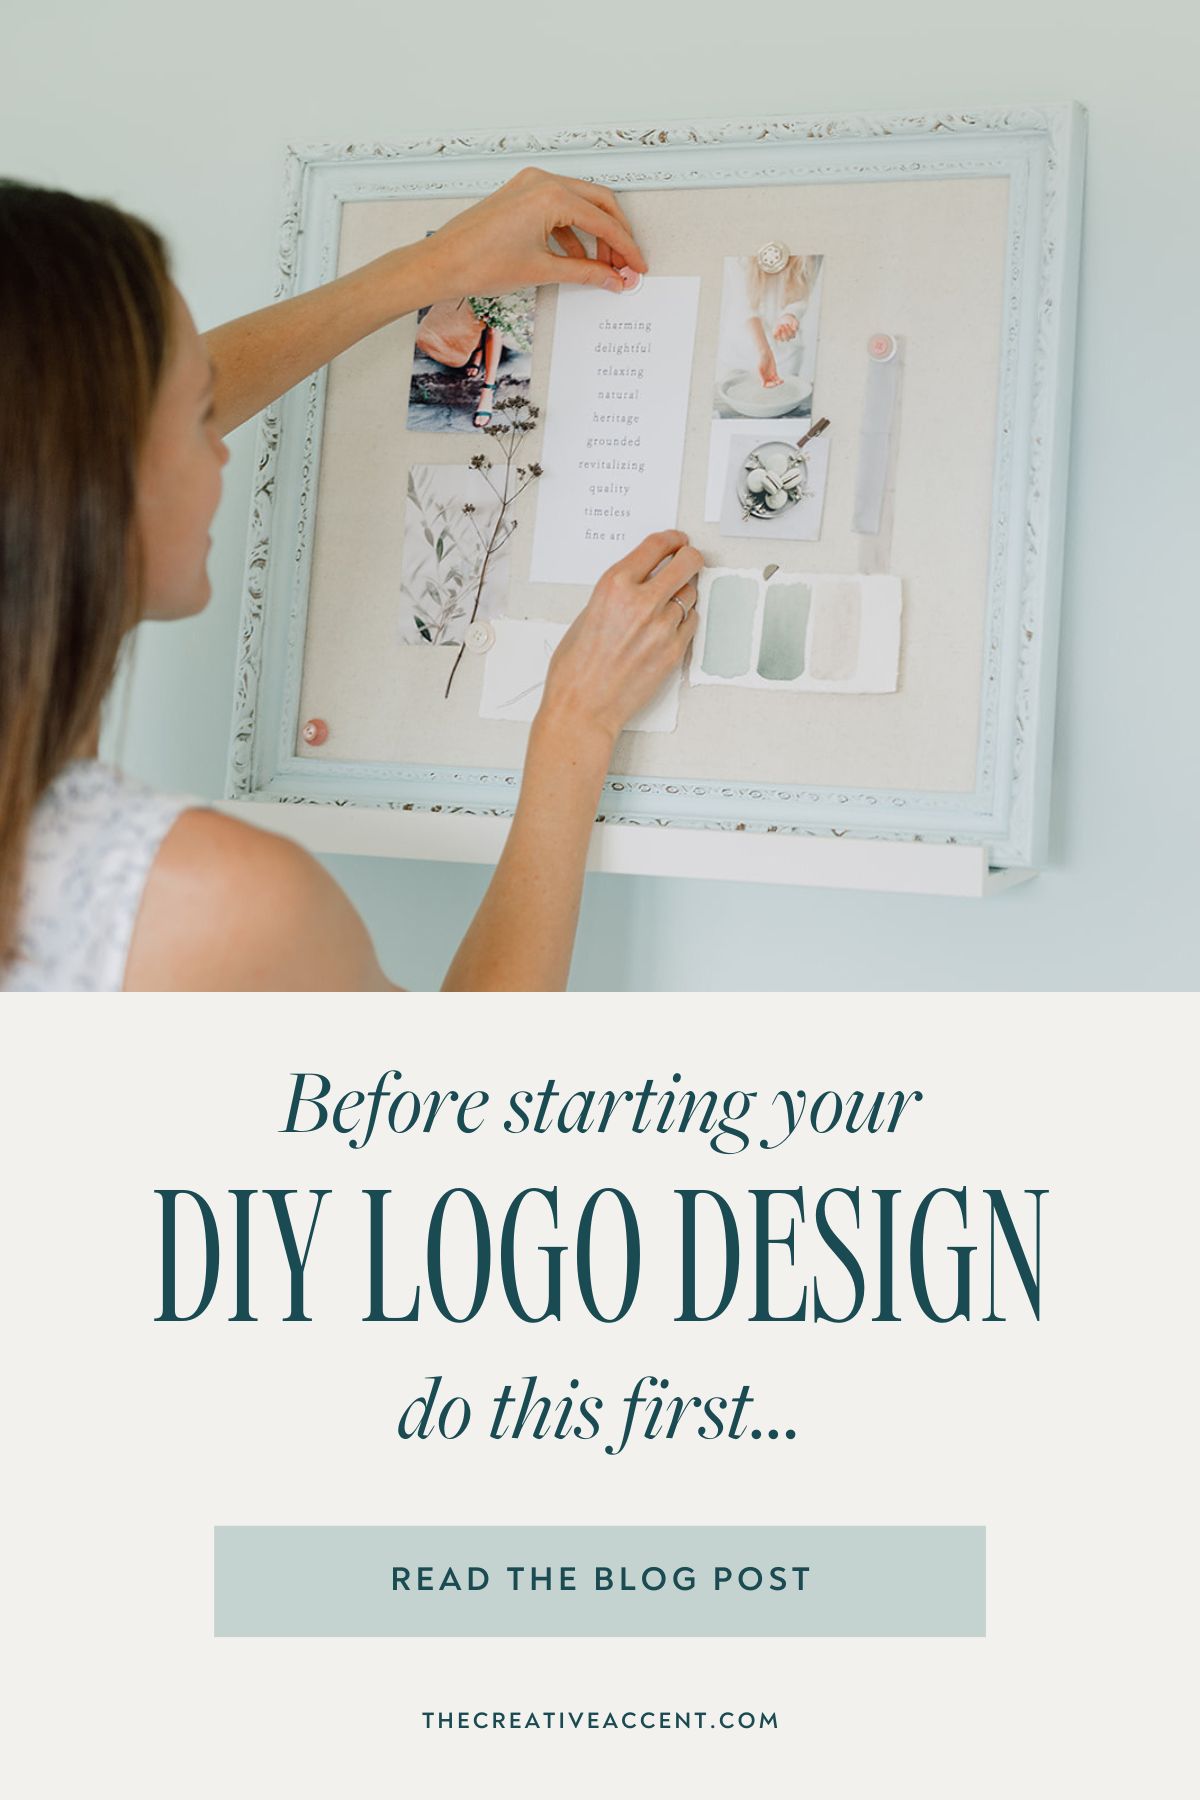 Before starting your diy logo design, do this first...